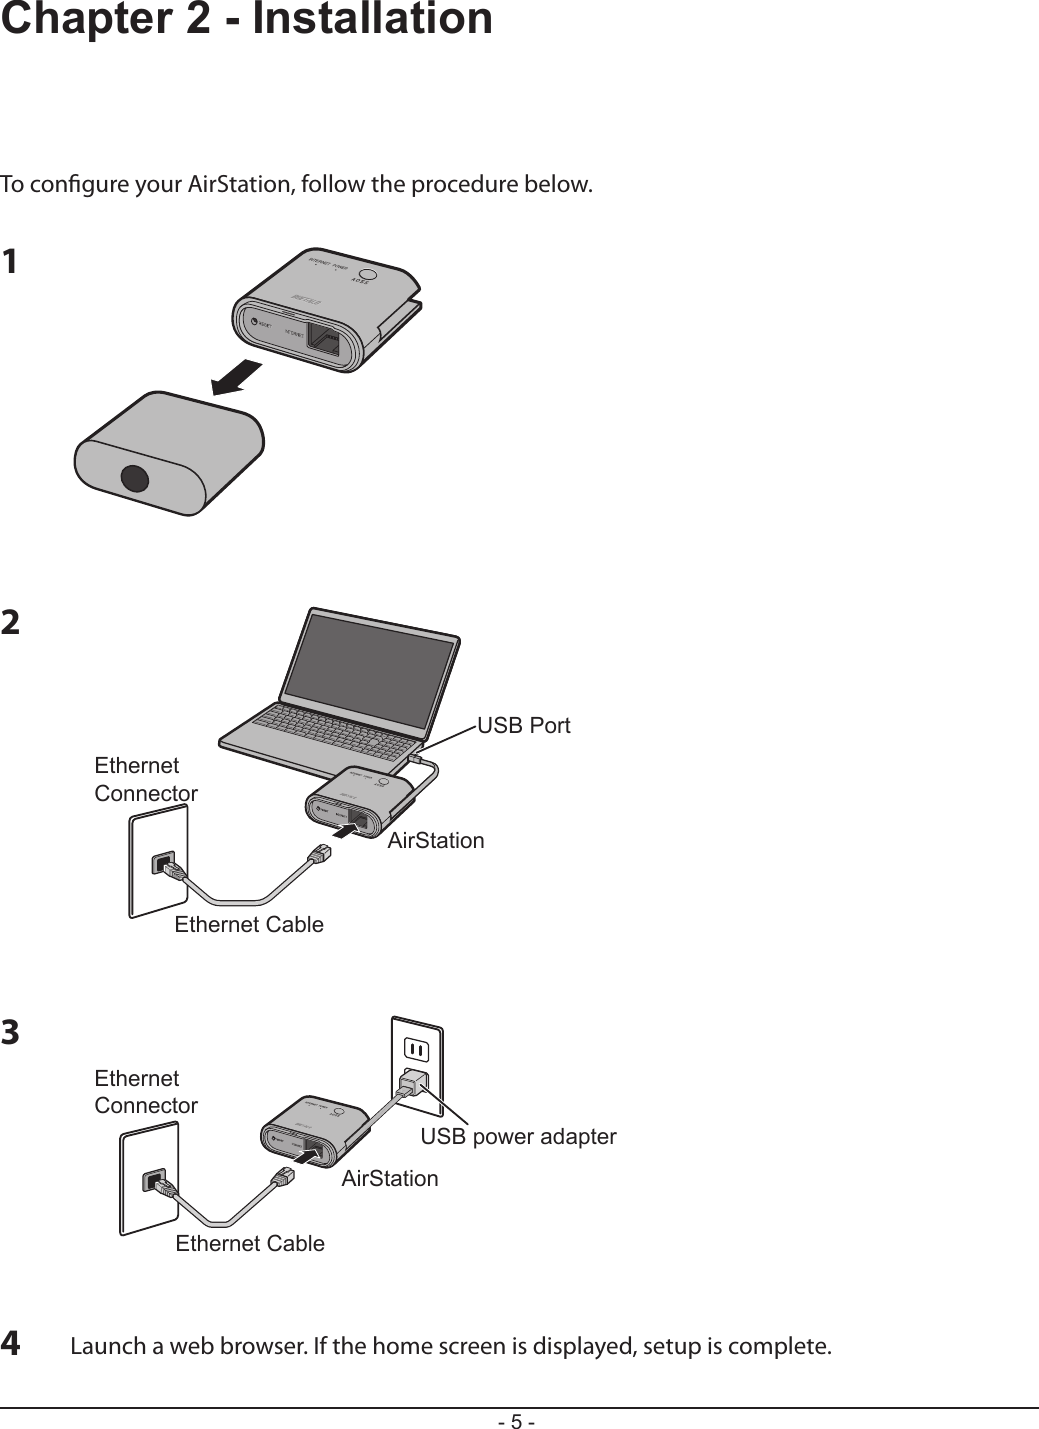 USB PortEthernet CableEthernet ConnectorAirStationUSB power adapterEthernet CableEthernet ConnectorAirStation- 5 -Chapter 2 - InstallationTo congure your AirStation, follow the procedure below.123Launch a web browser. If the home screen is displayed, setup is complete.4